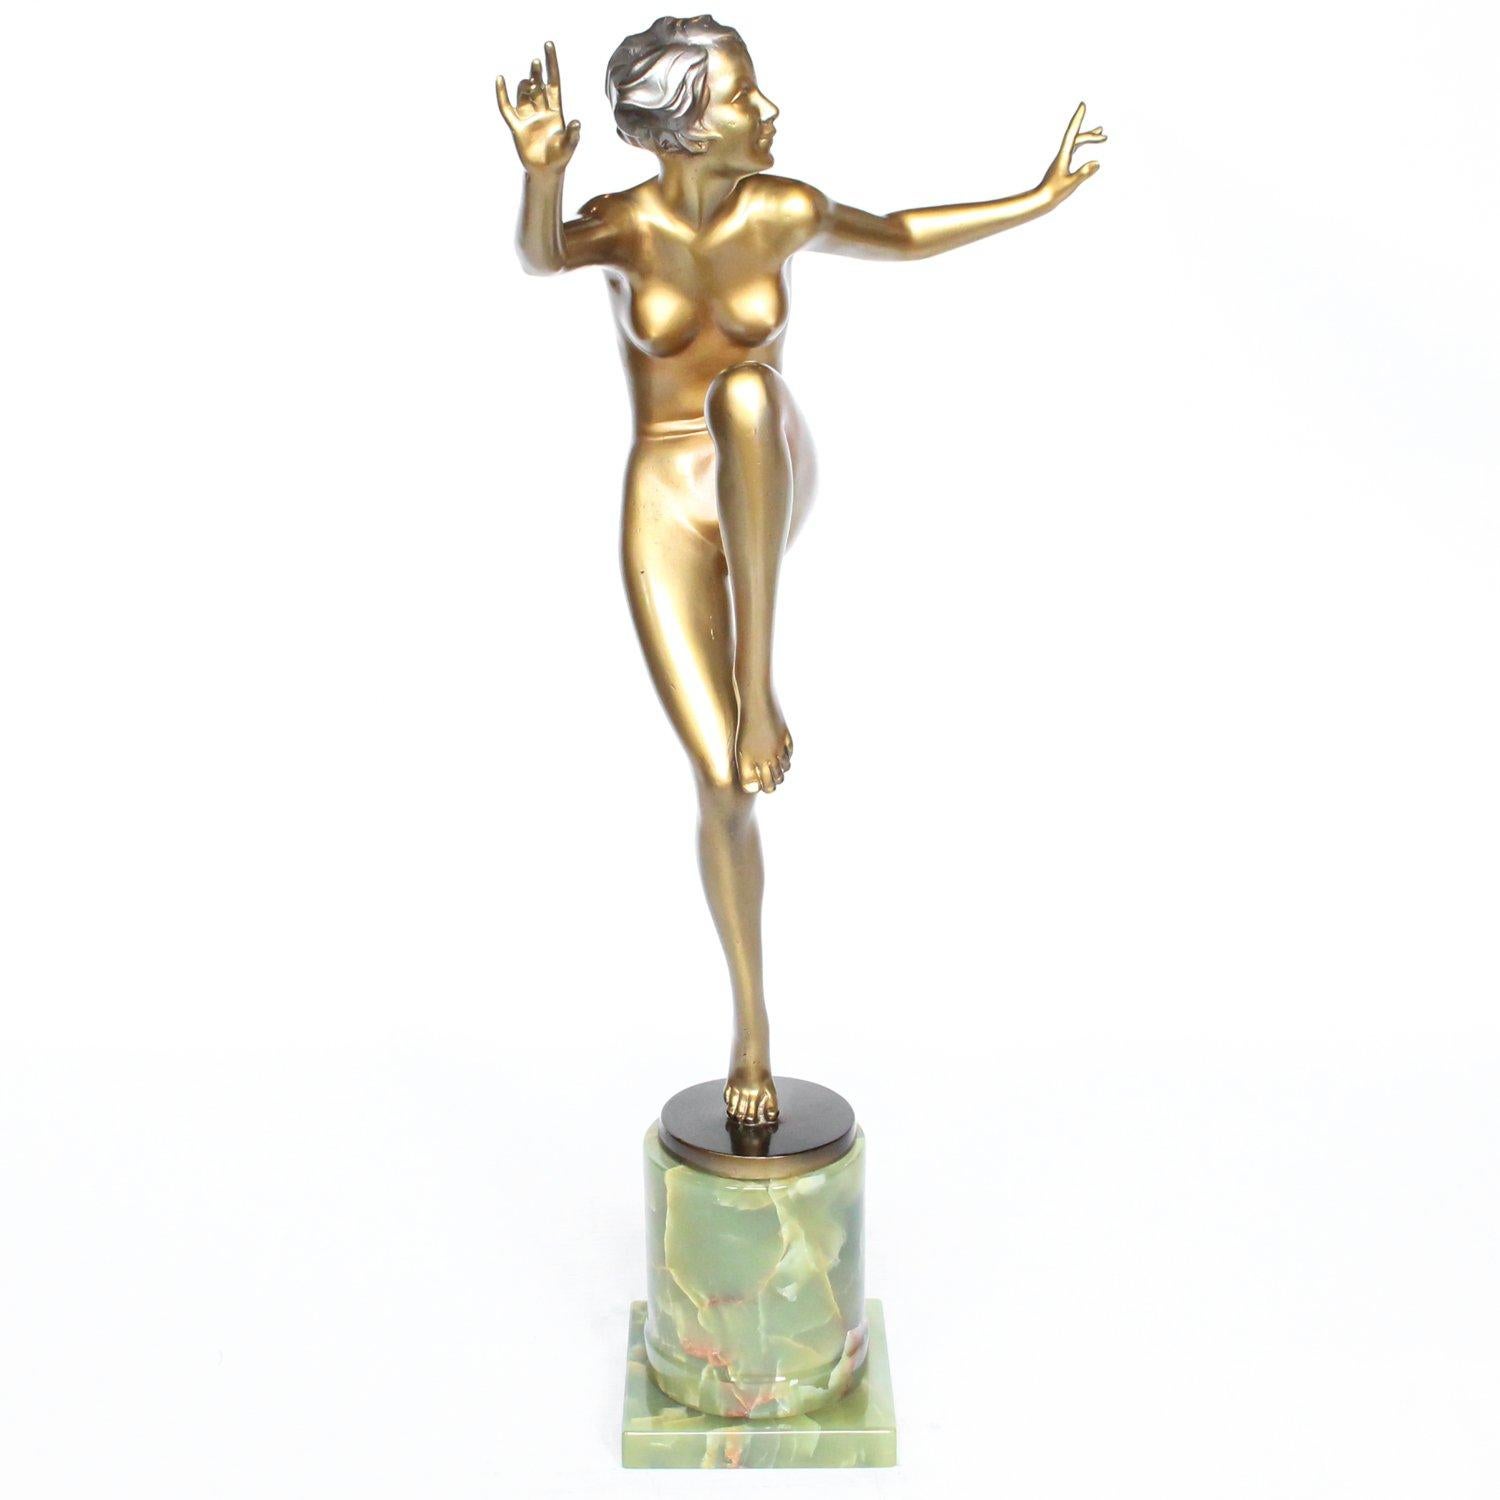 Con Brio, a large Art Deco, cold painted bronze figure by Josef Lorenzl, (1892-1950). A dancing woman in stylized pose set over a green onyx plinth.

Signed Lorenzl to bronze.

Josef Lorenzl, born 1st September 1892 began his career at a foundry